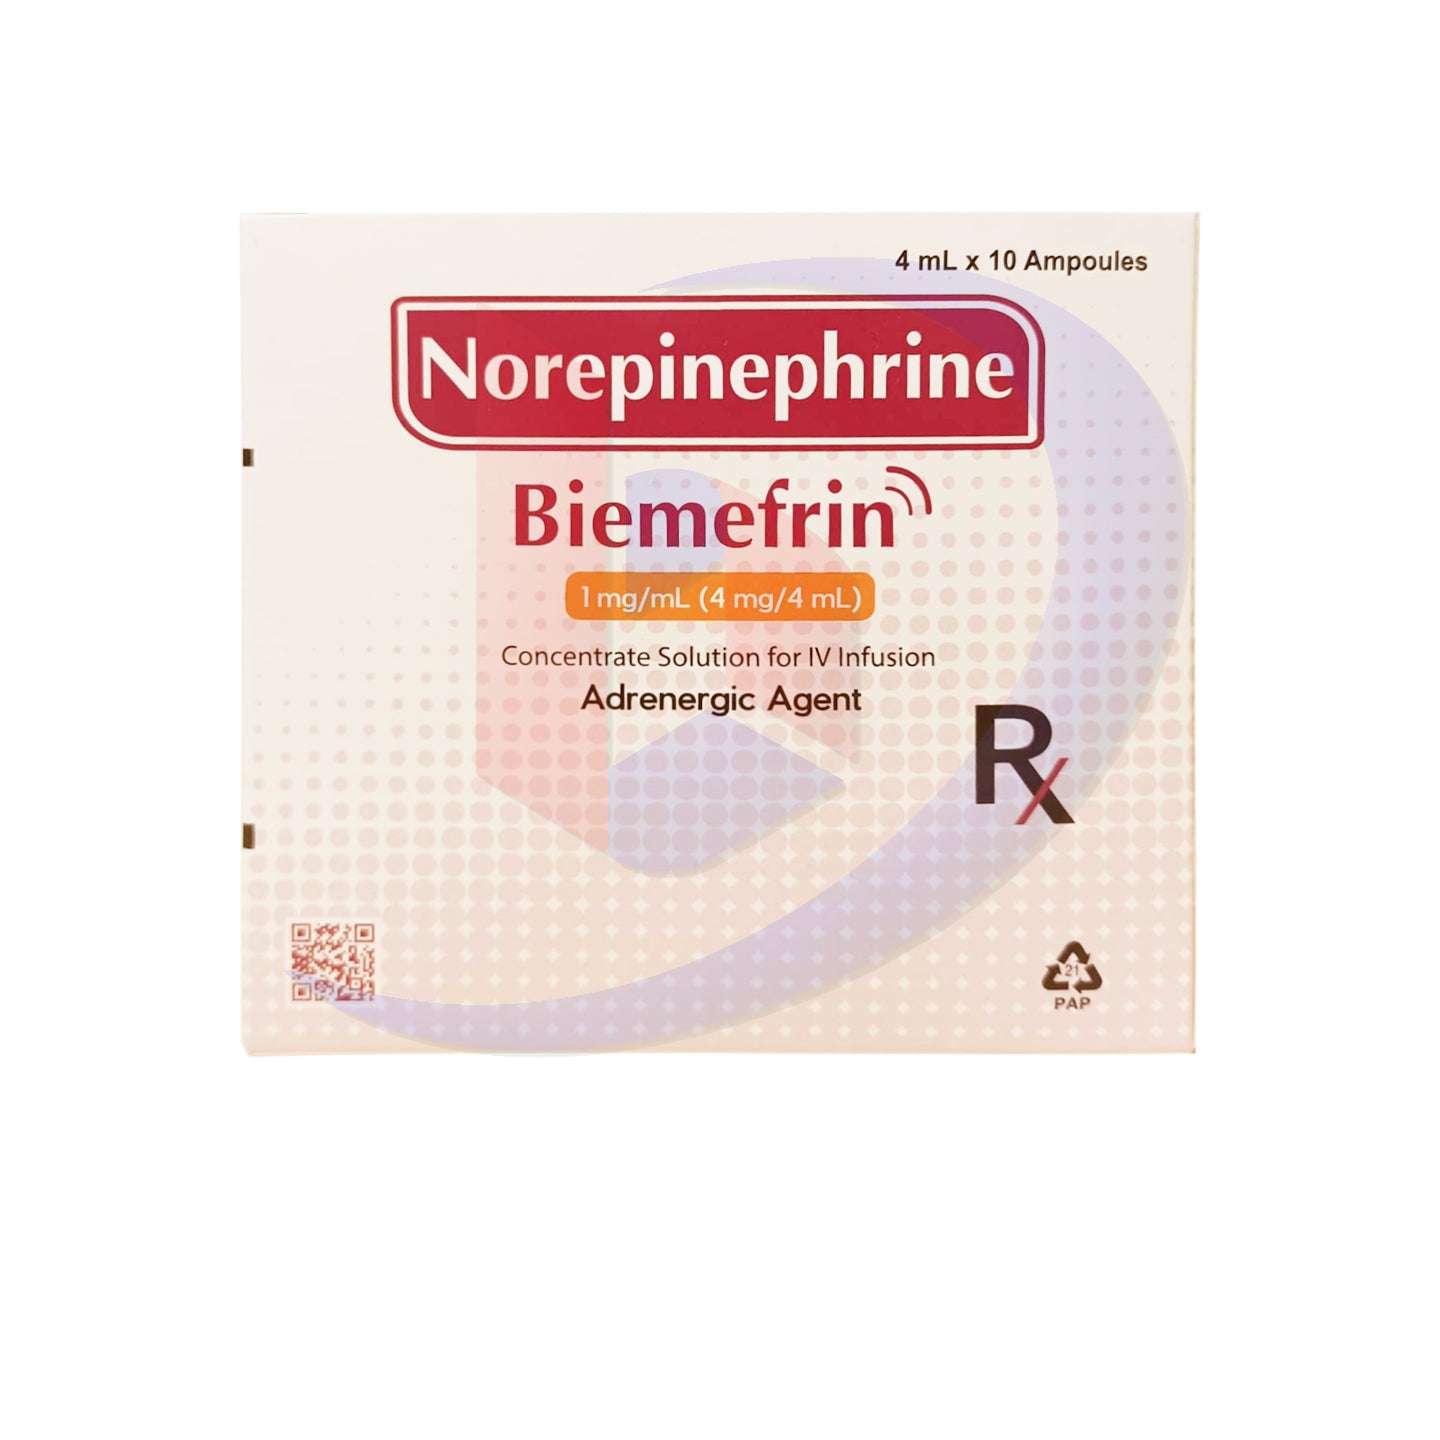 Norepinephrine (Biemefrin) 1mg/ml (4mg/4ml) Concentrate Solution for IV Infusion Adrenergic Agent 10 Ampoule x 4ml